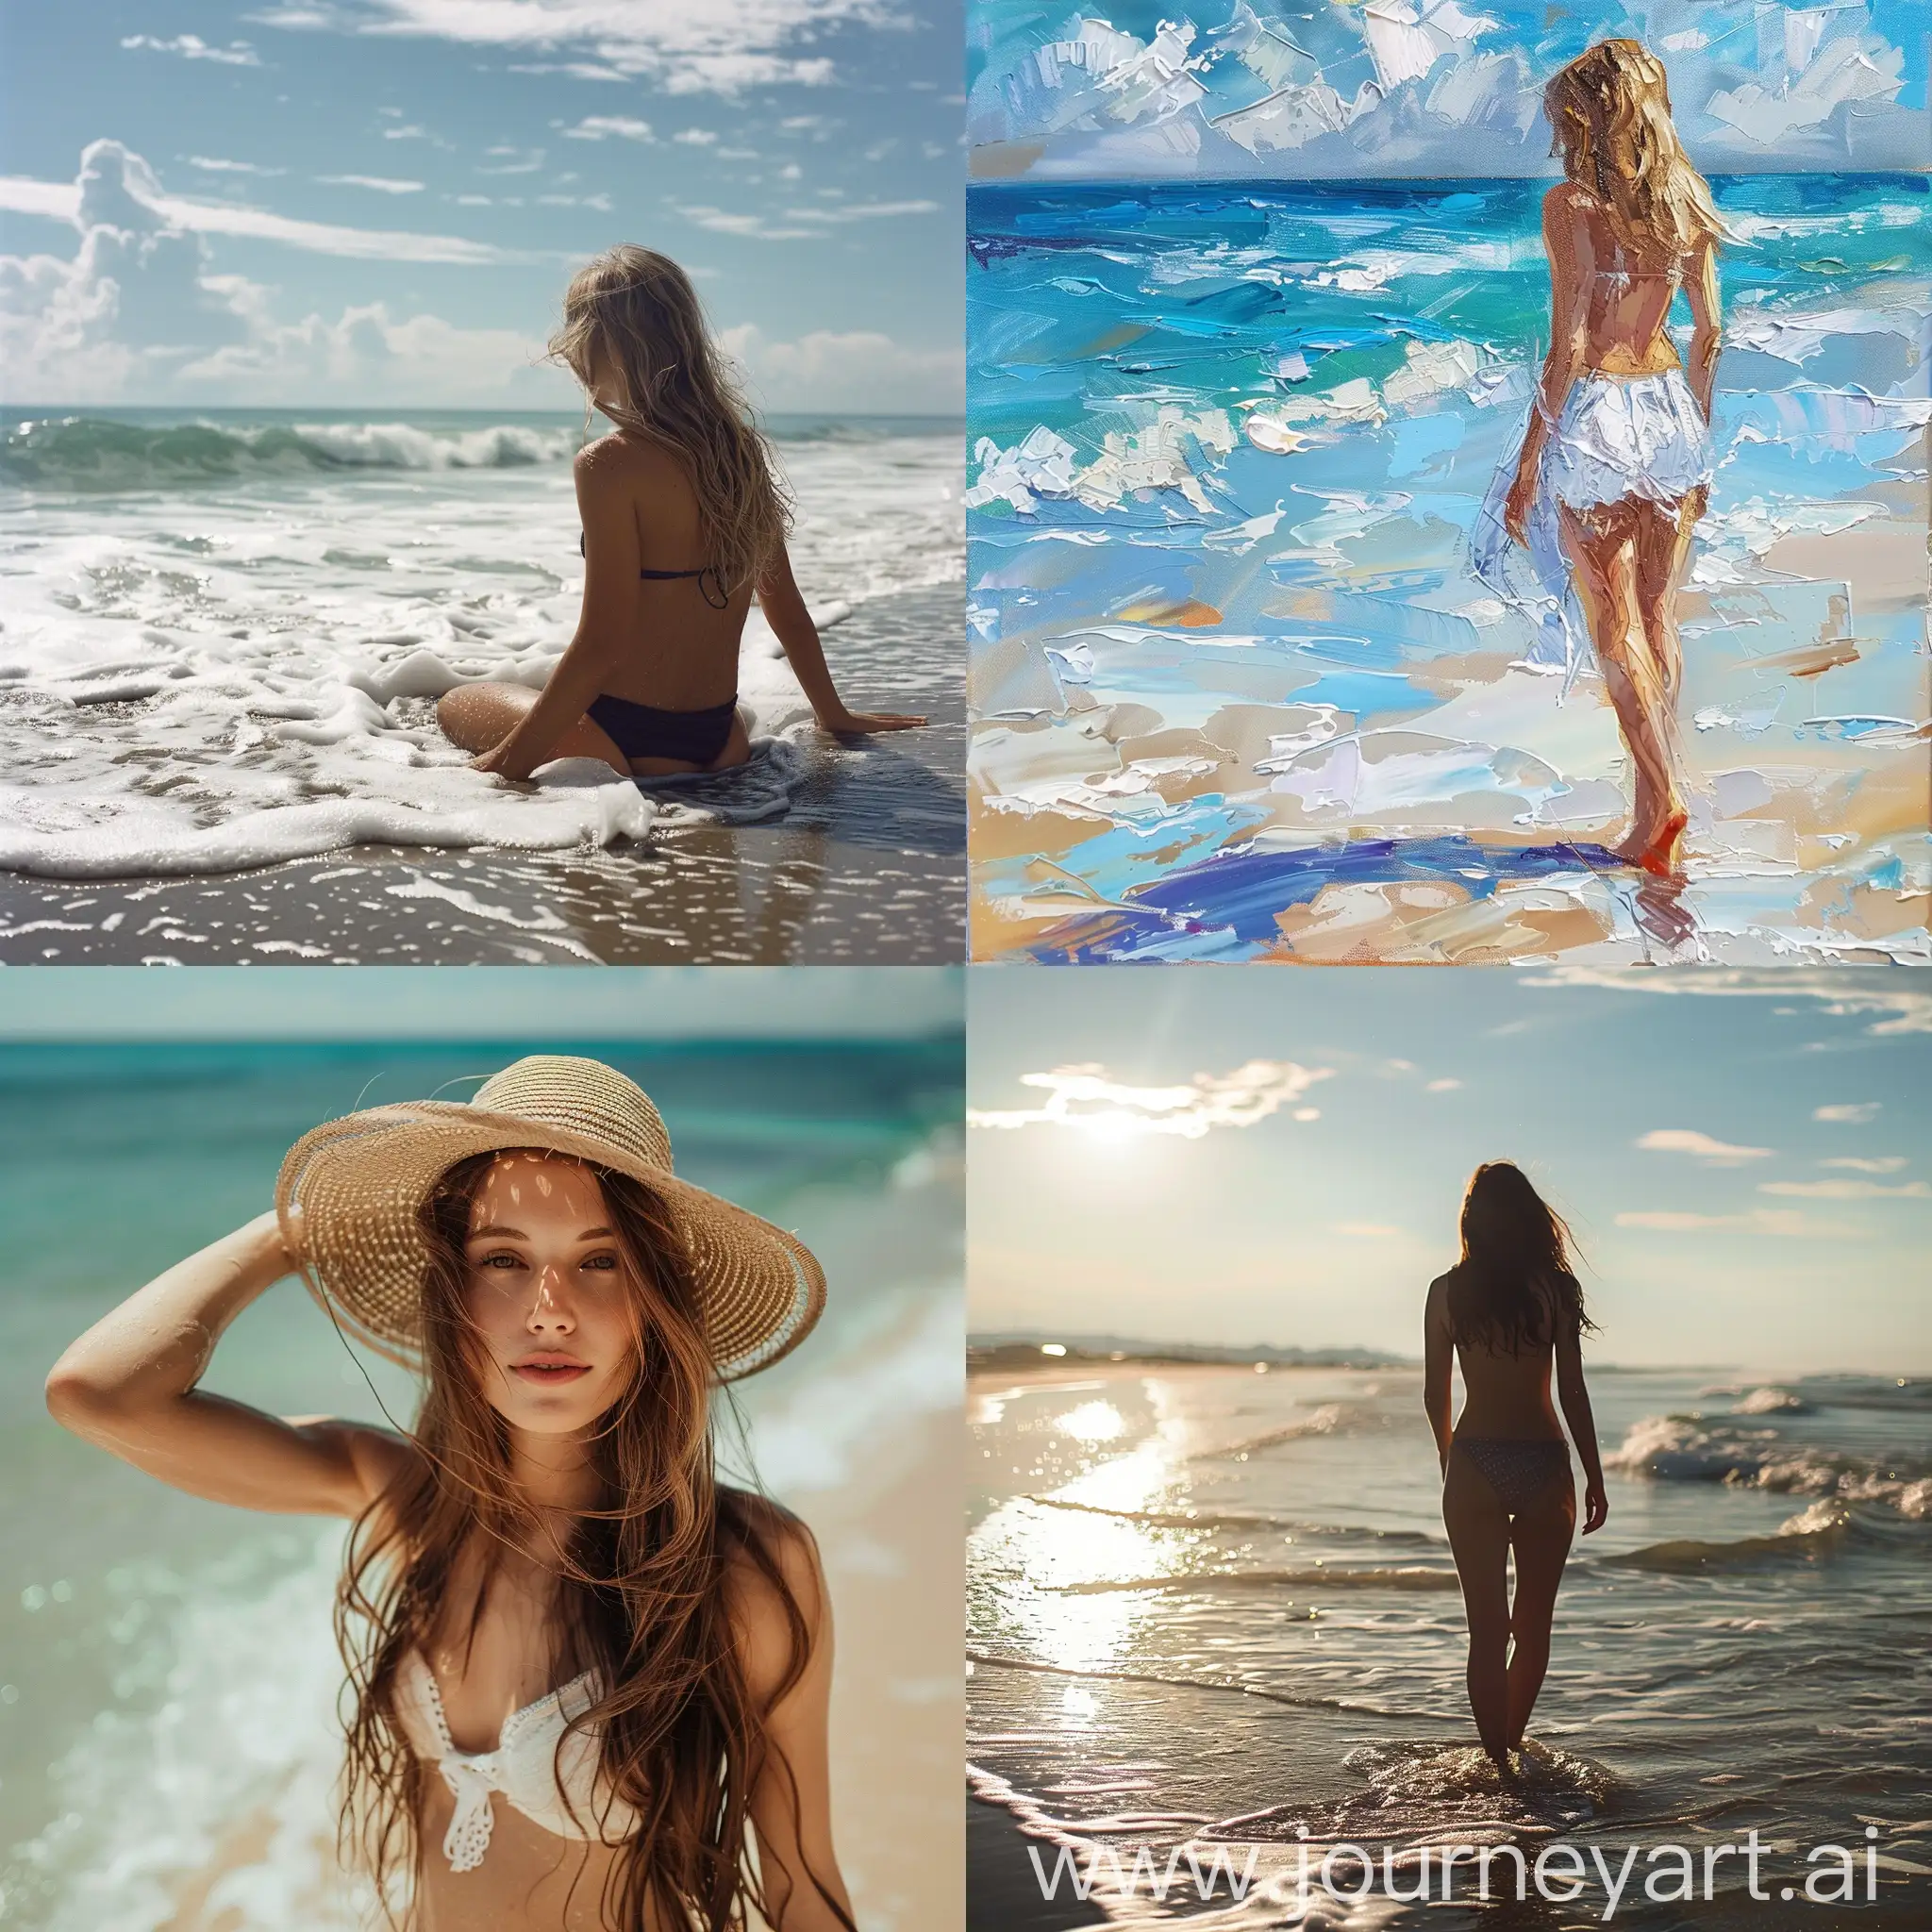 Serene-Beachscape-with-a-Young-Girl-Vibrant-Square-Aspect-Ratio